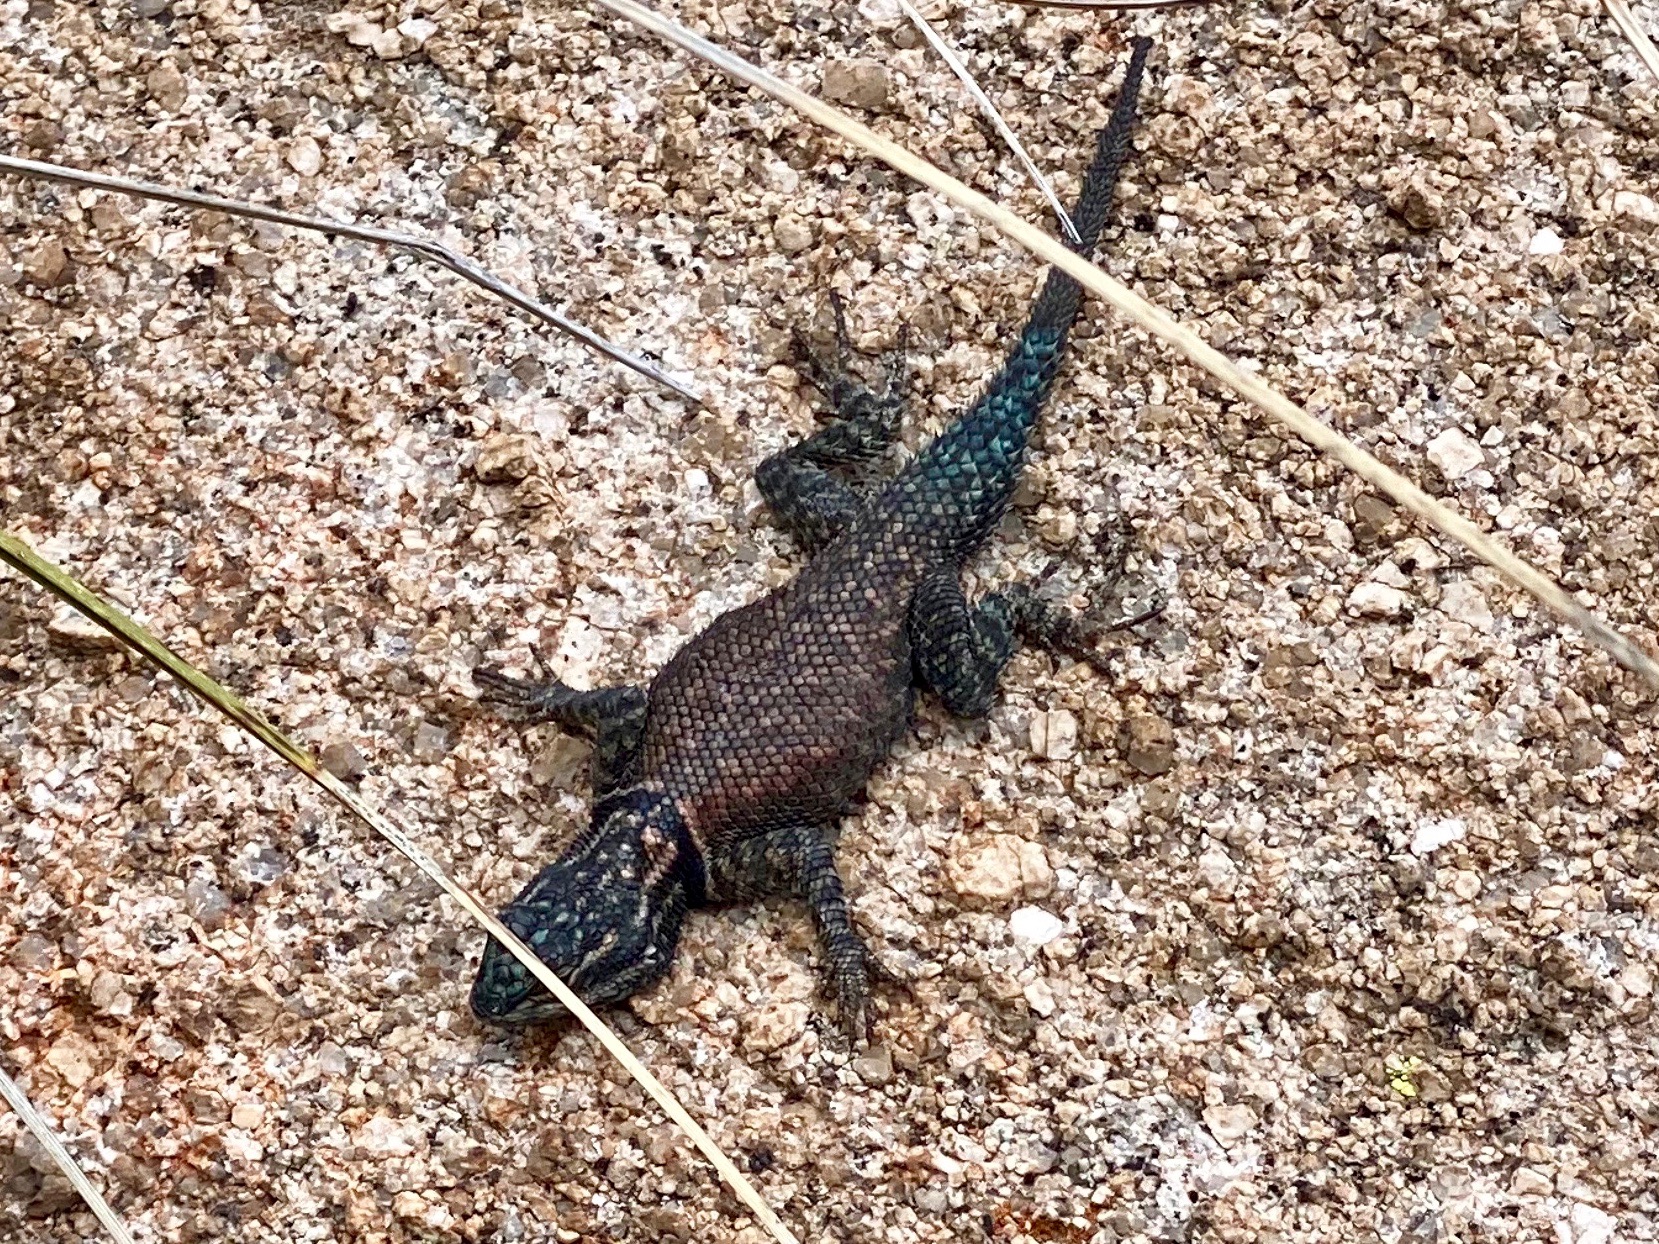 Photo by diane williamson  |  First time hiking this trail and spotted this guy just sunning himself.